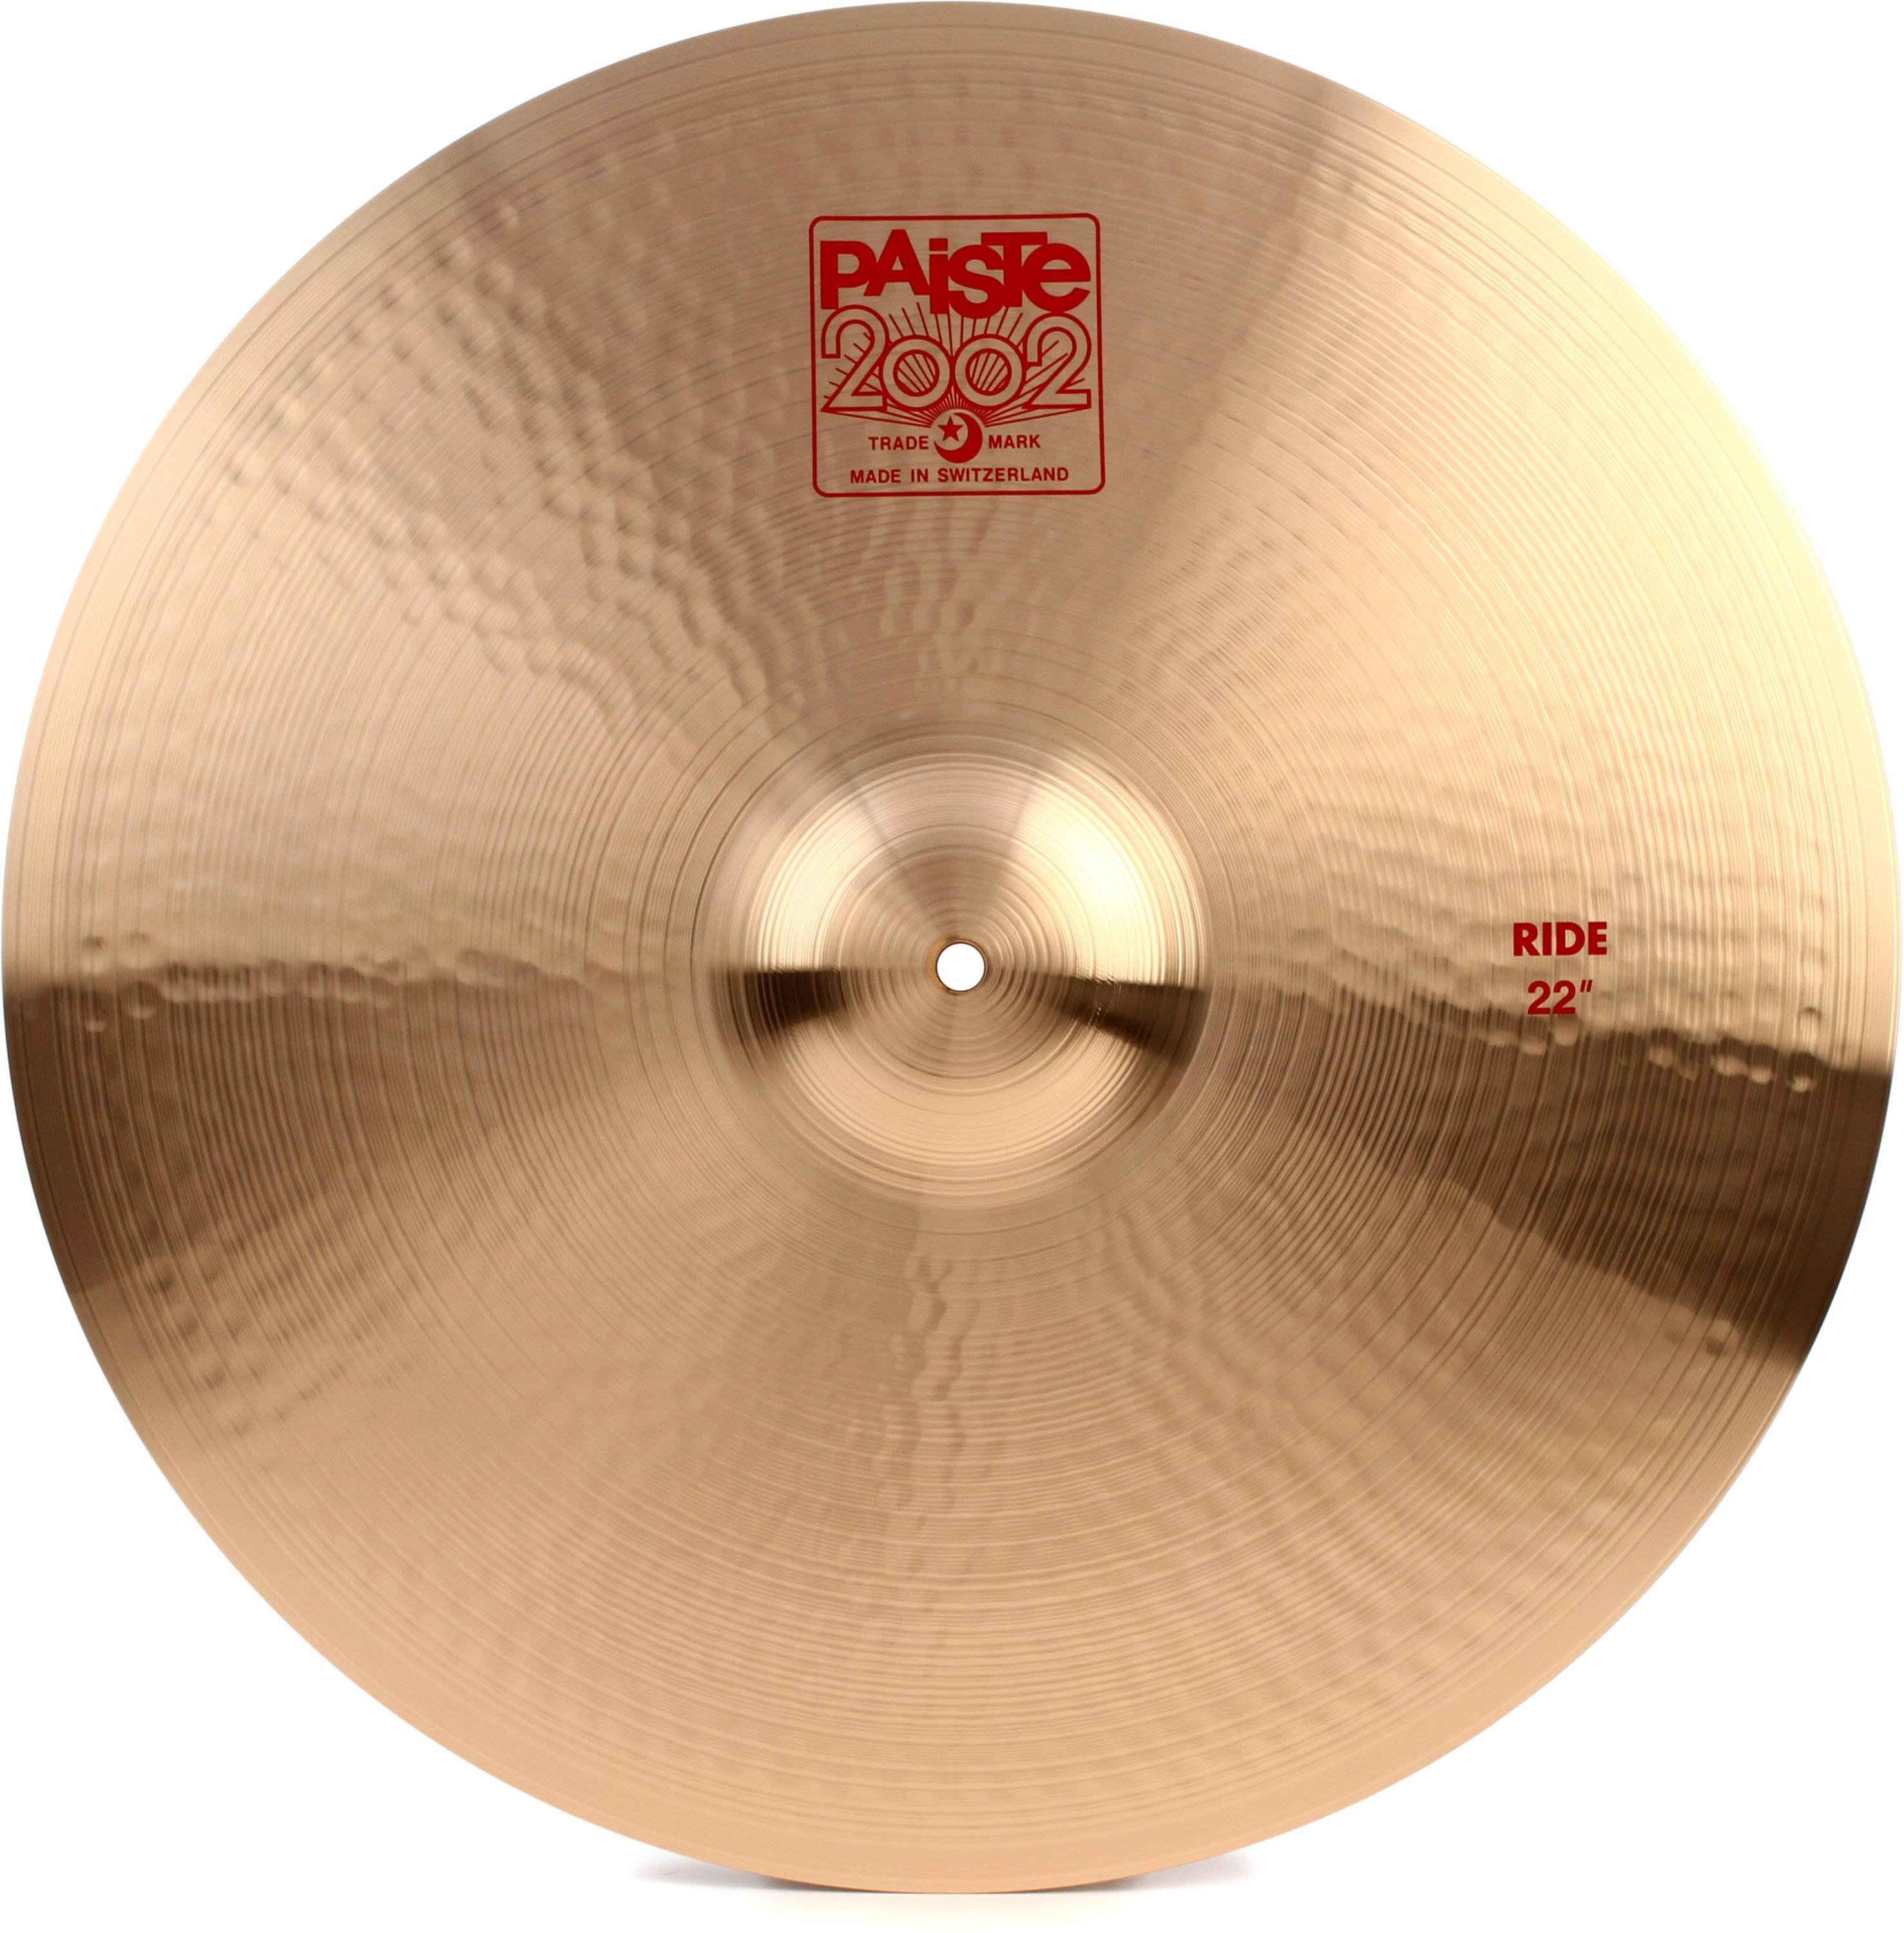 Paiste 2002 Ride Cymbal - 22-inch | Sweetwater